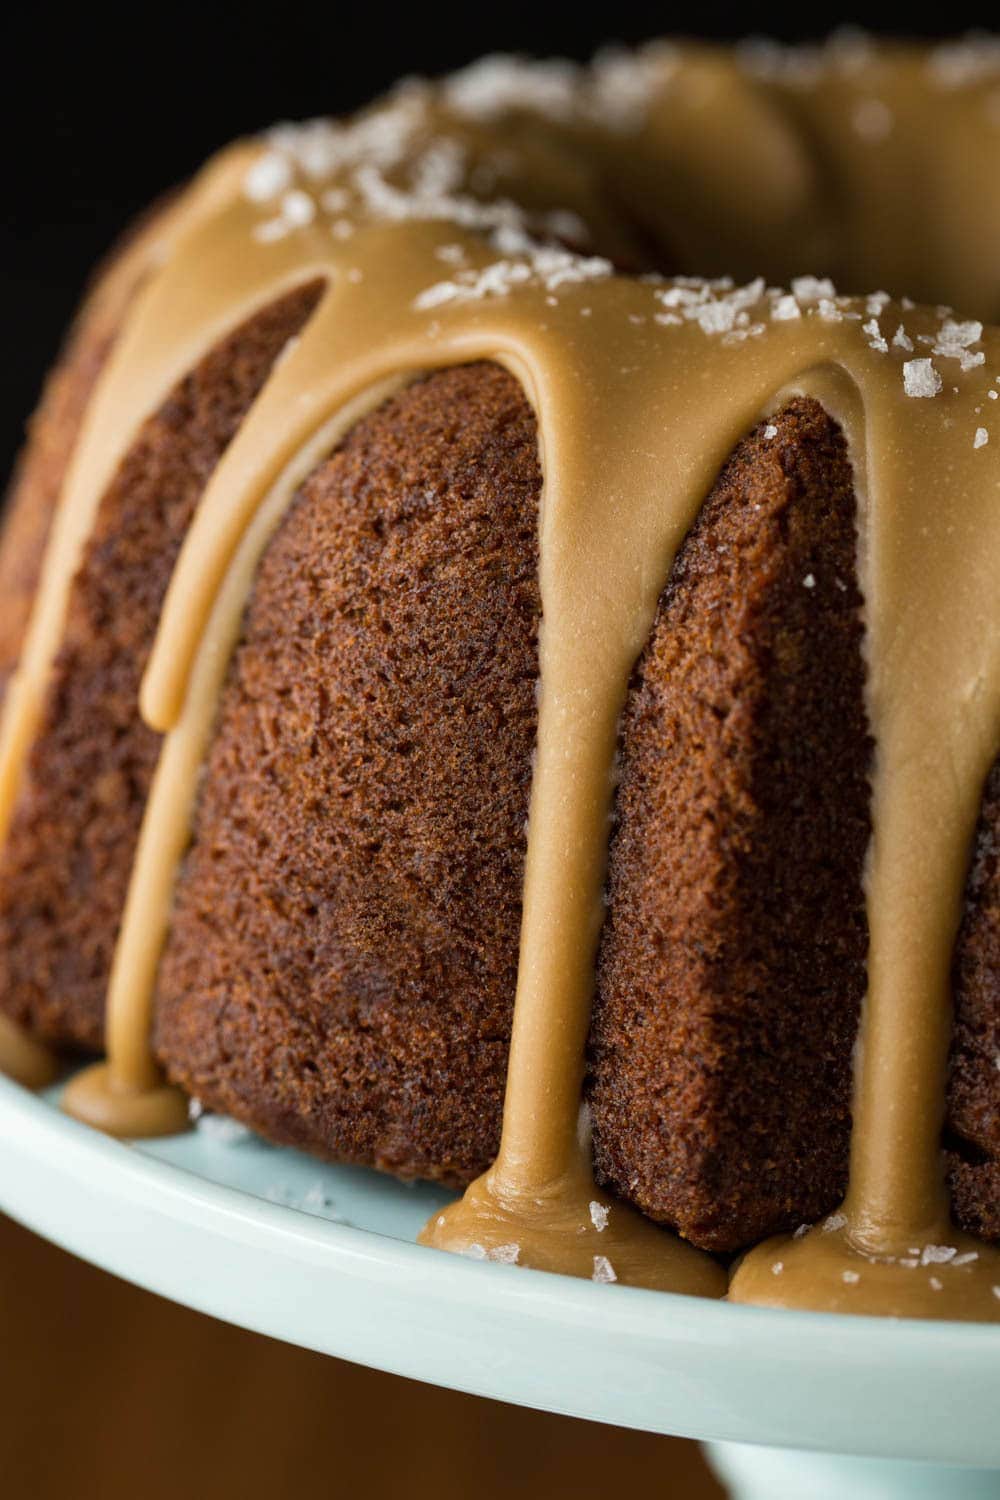 How to Ice a Bundt Cake - an easy video demonstration for making a Bundt cake look as beautiful as it tastes! thecafesucrefarine.com